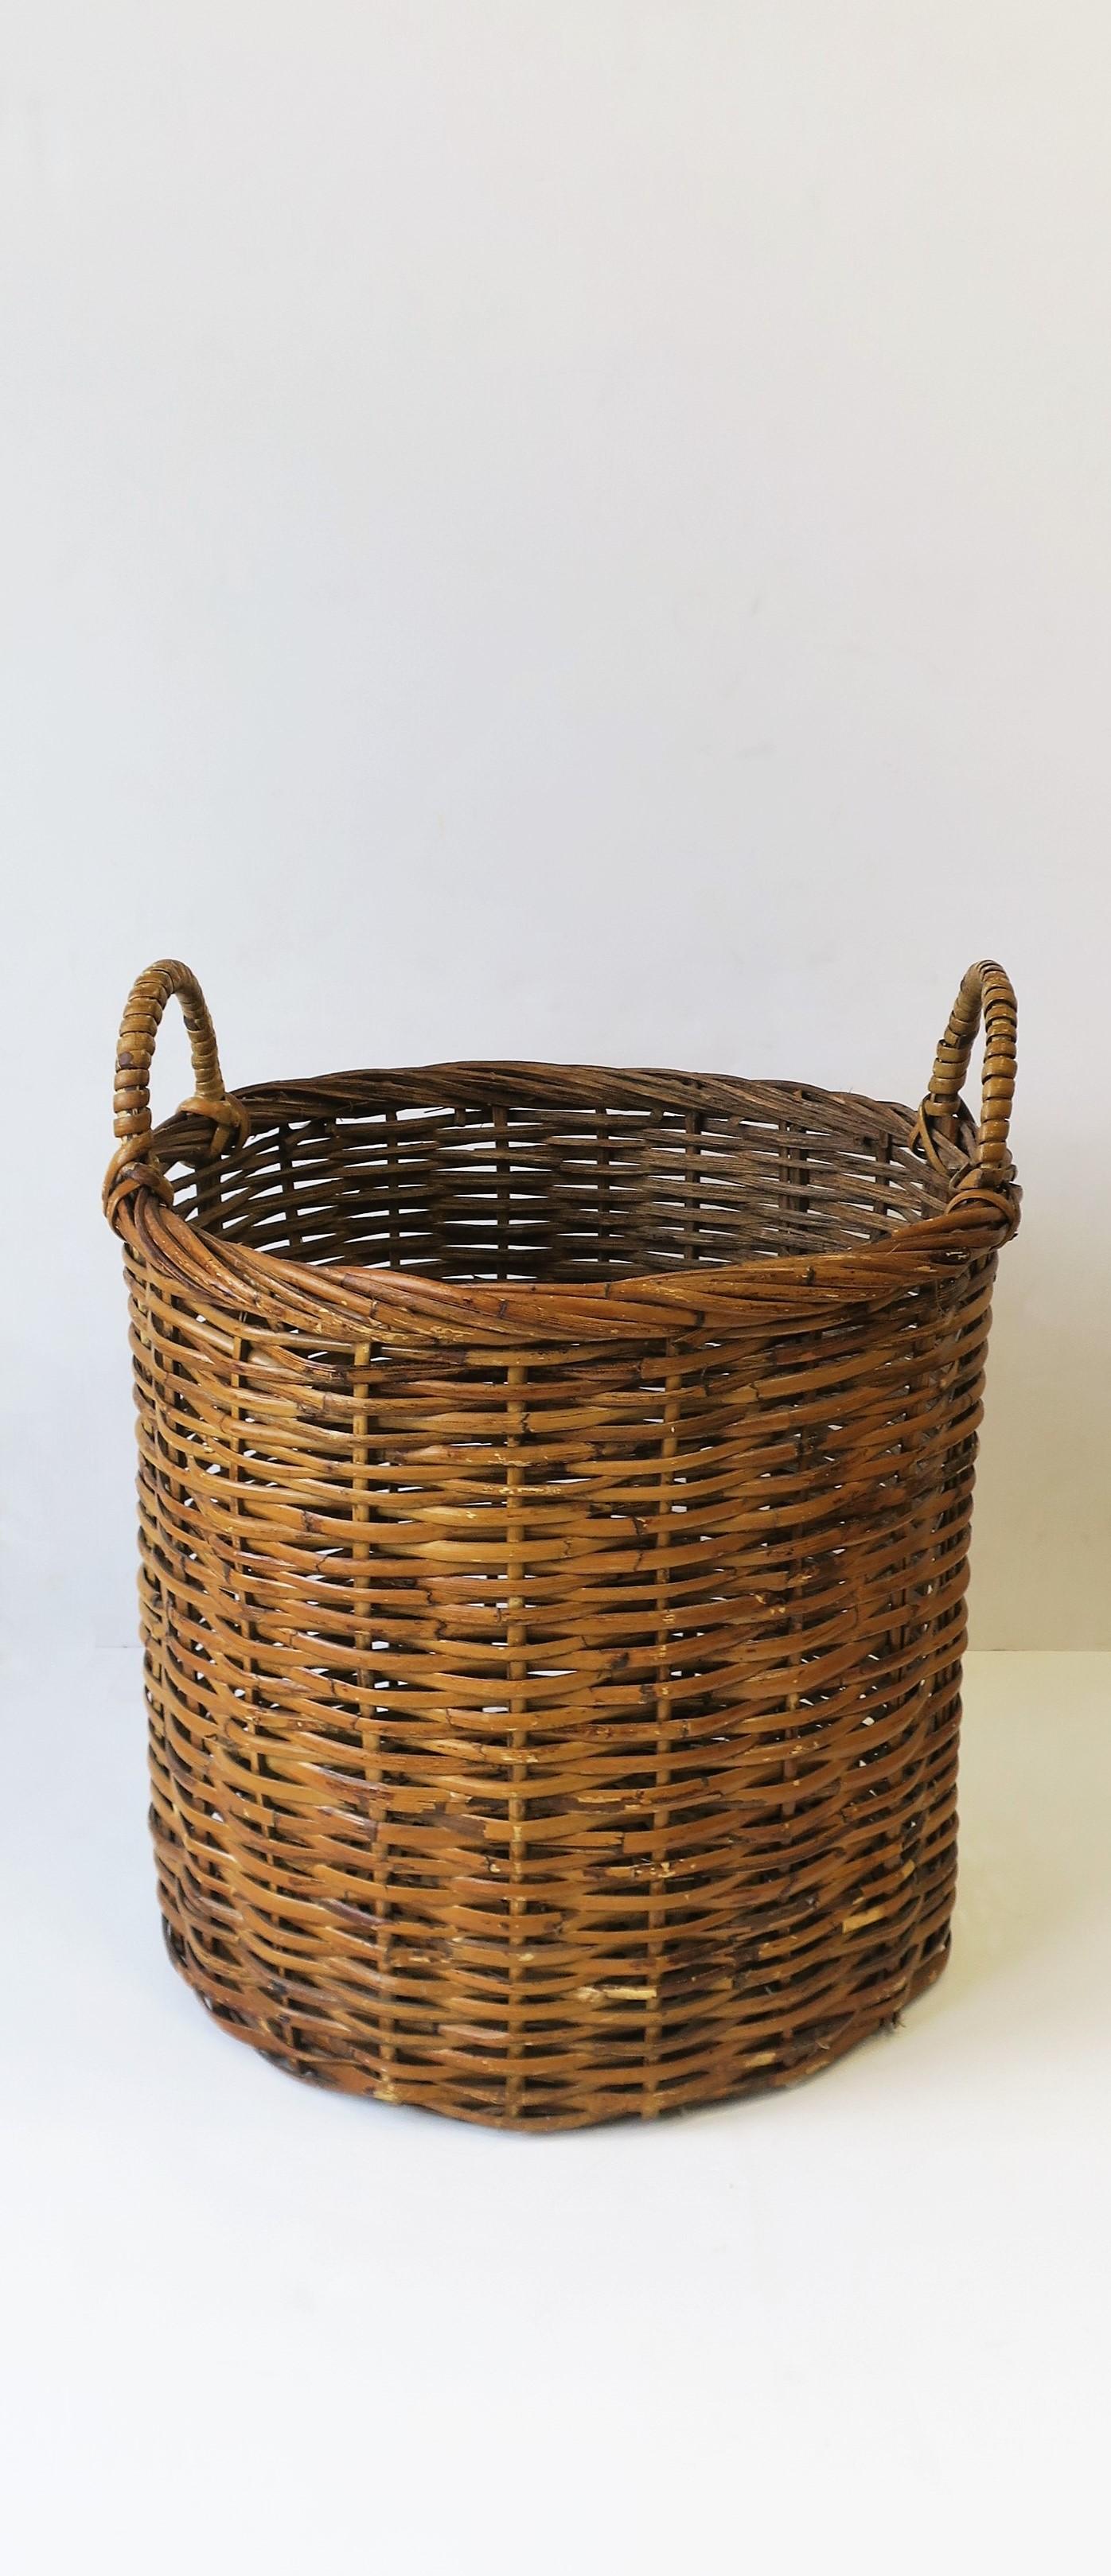 A relatively large, vintage wicker basket with handles, circa 20th century. Measures: 17